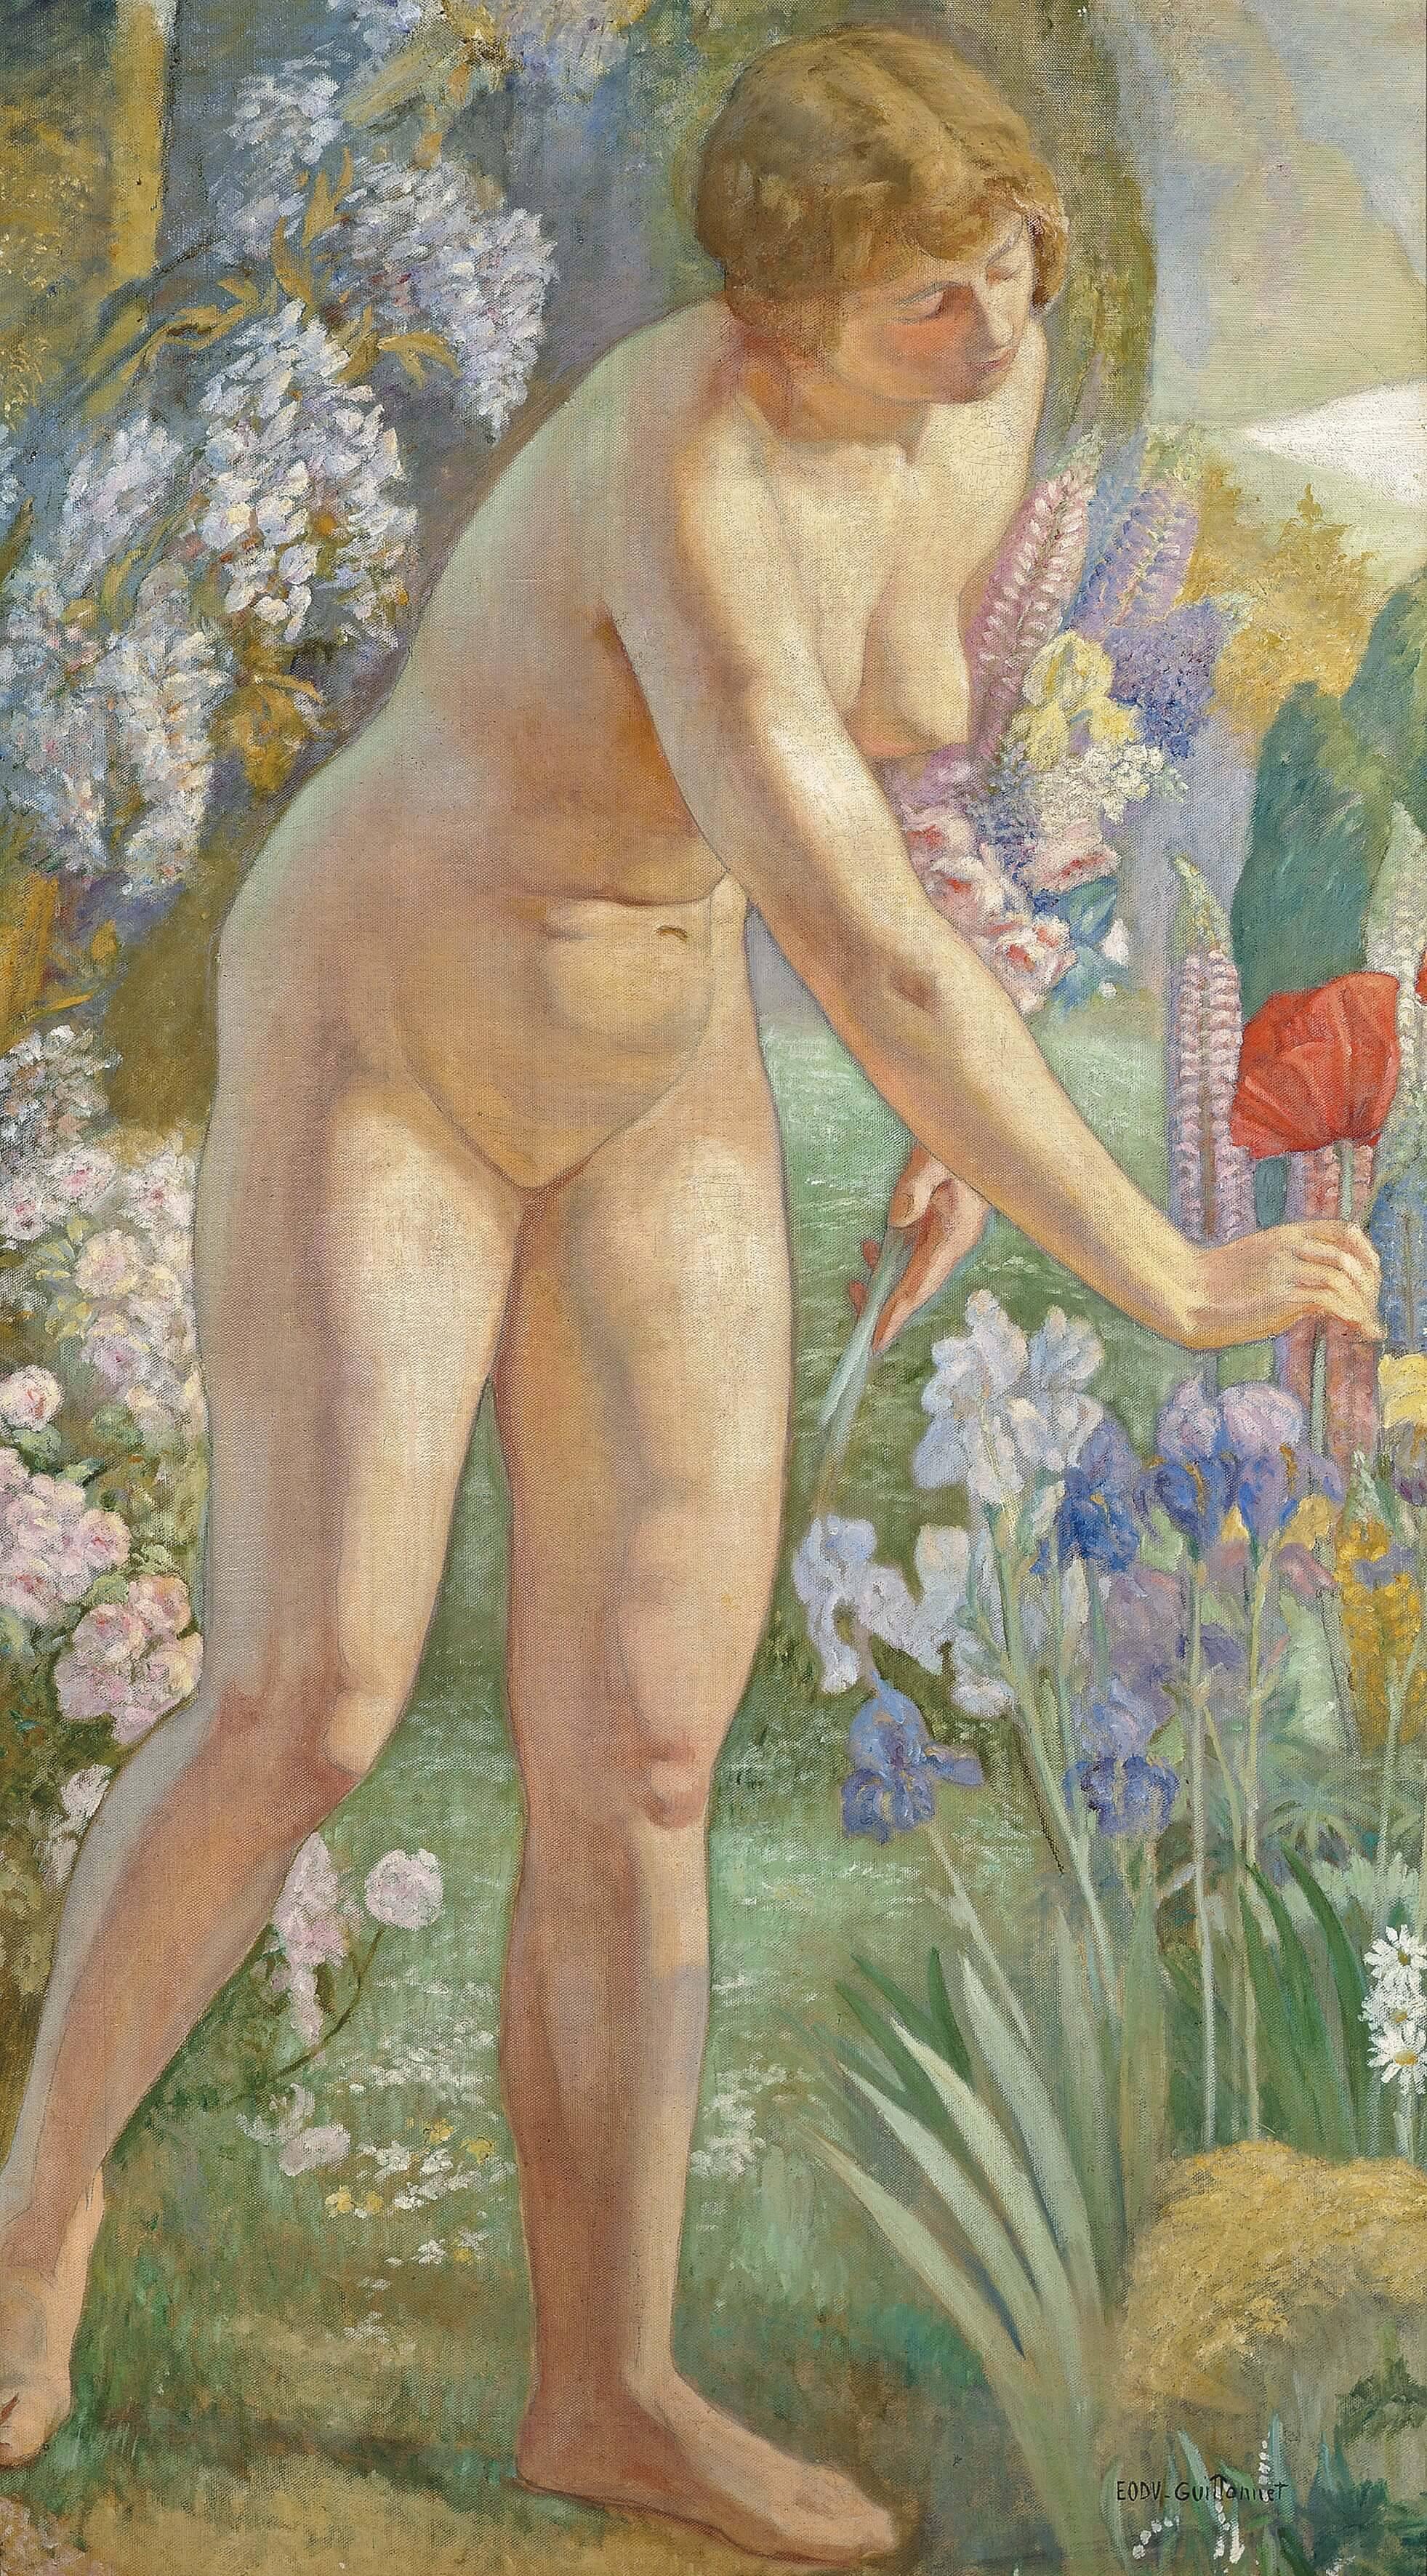 Octave Guillonnet Nude Painting - Very large, Impressionist early 20th Century nude, oil painting, Picking Poppies